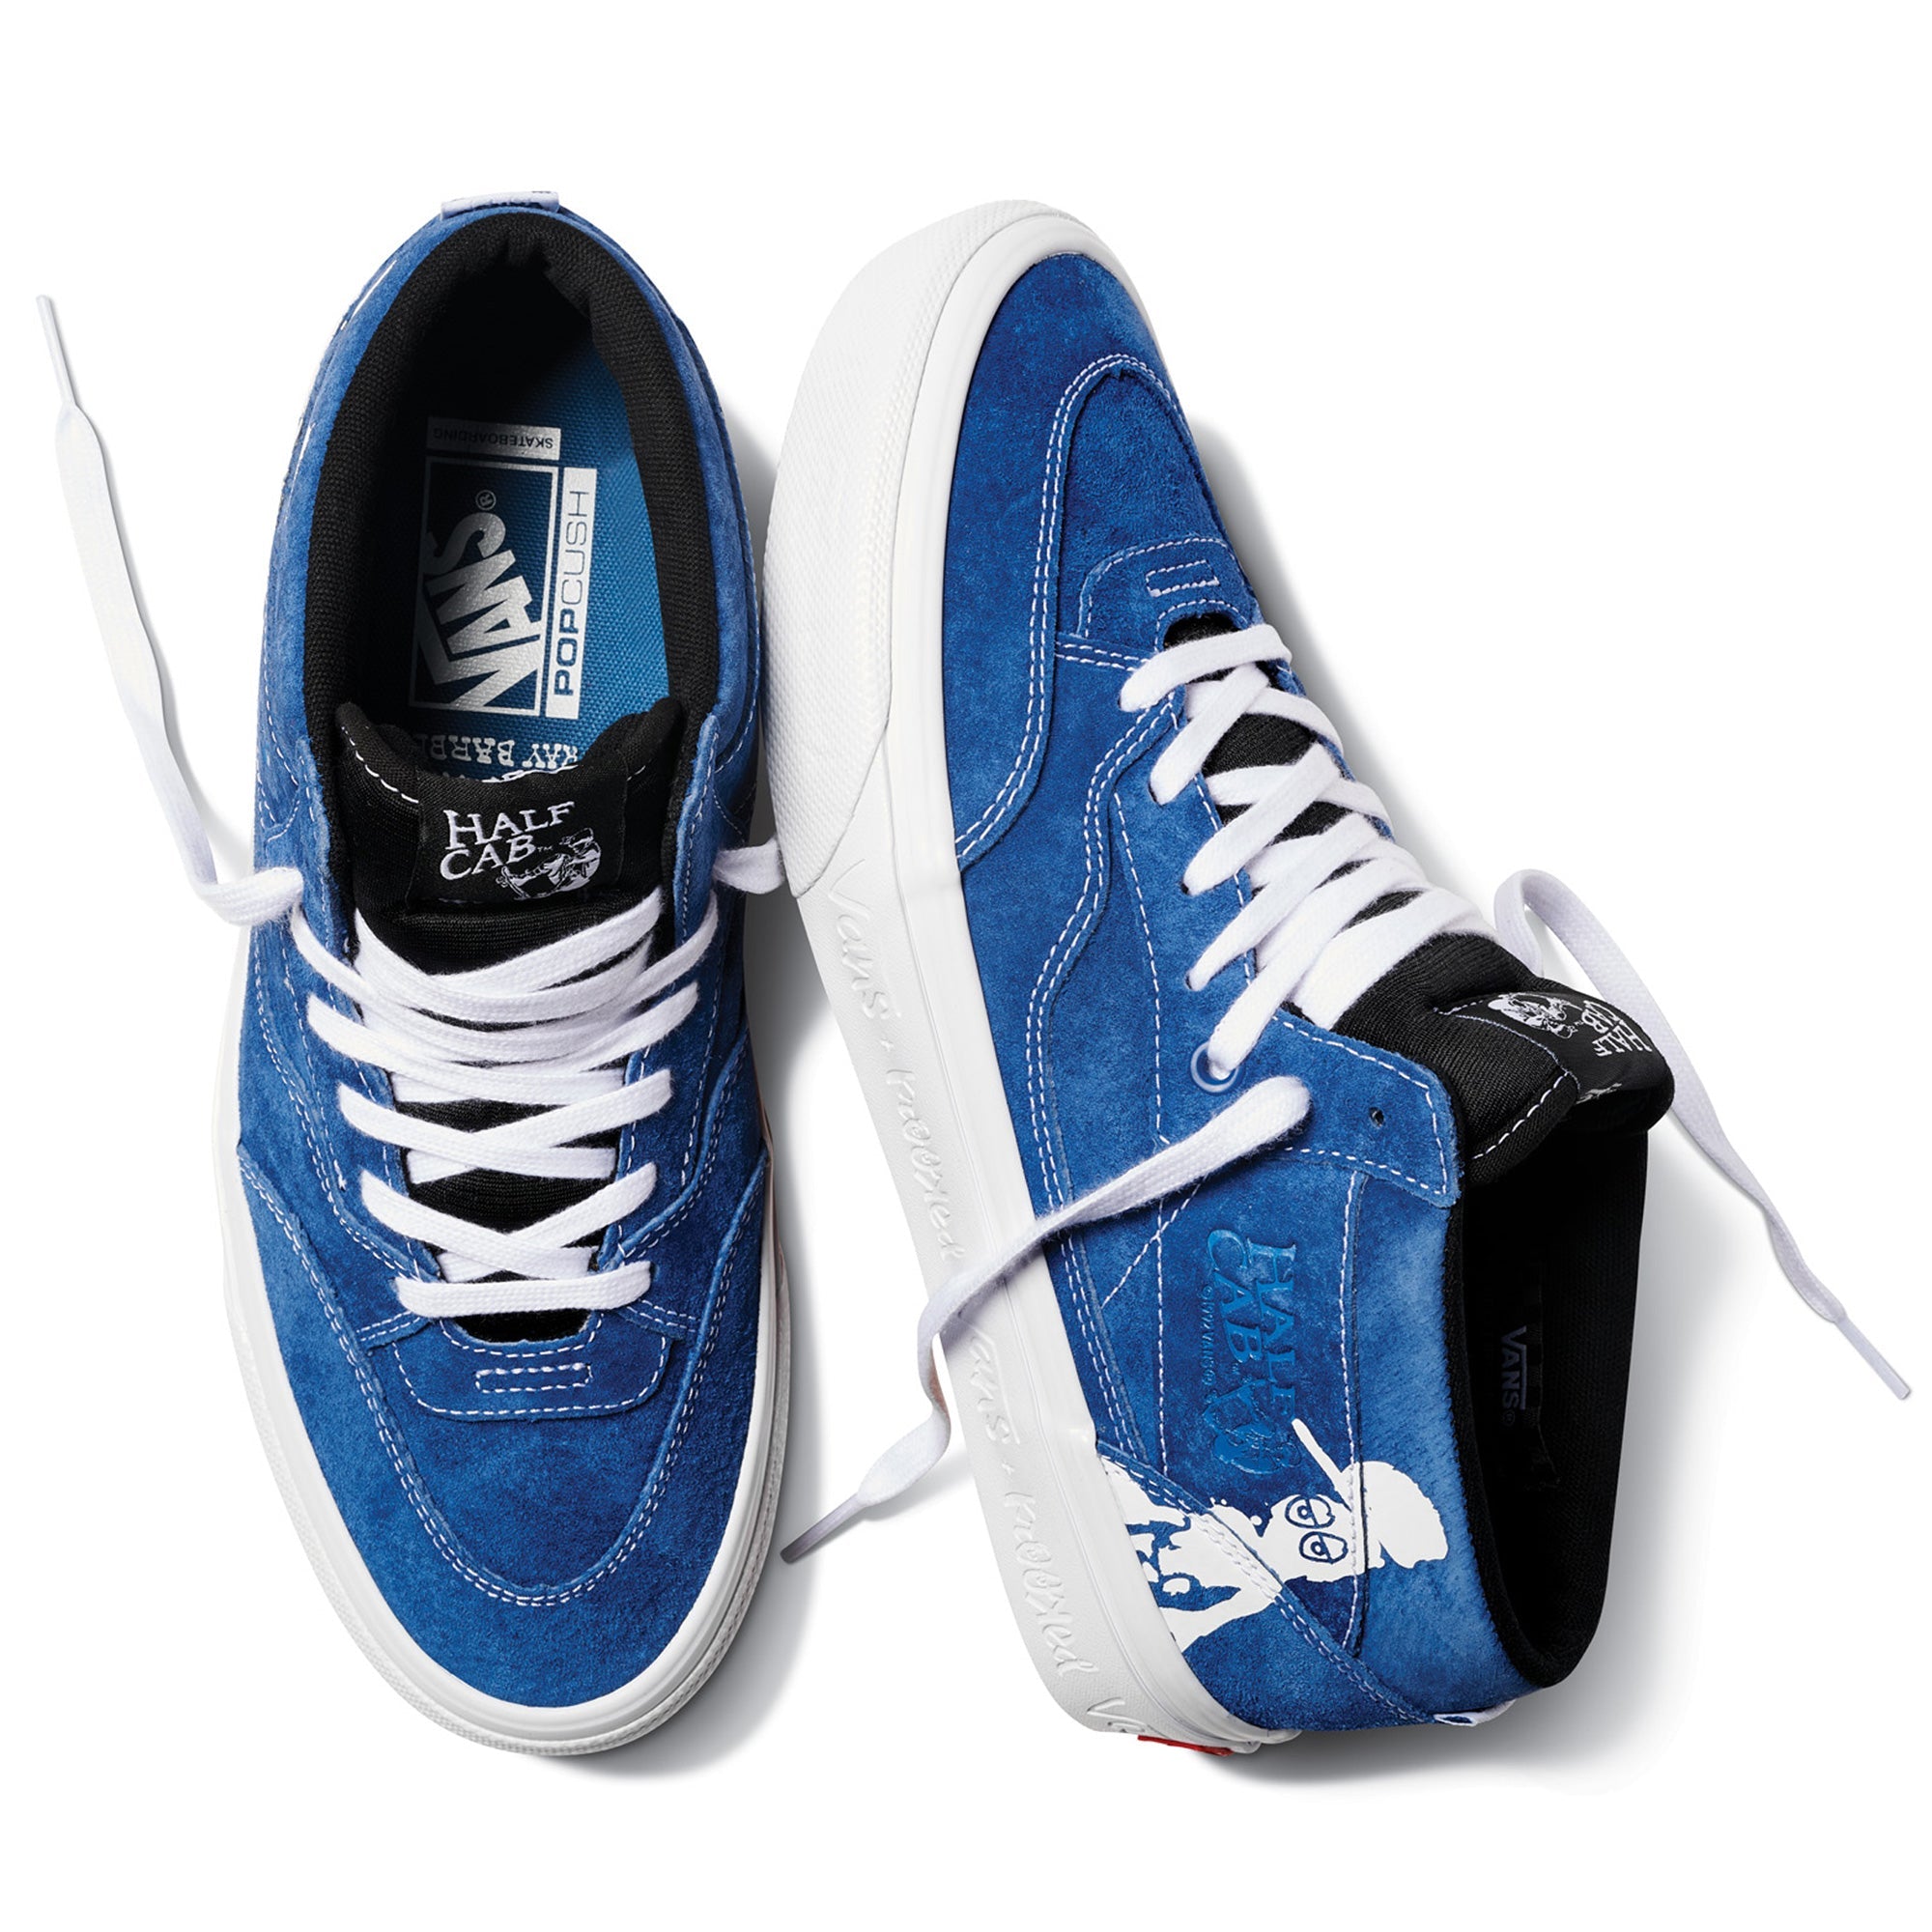 Vans x Krooked x Natas for Ray Barbee Collection